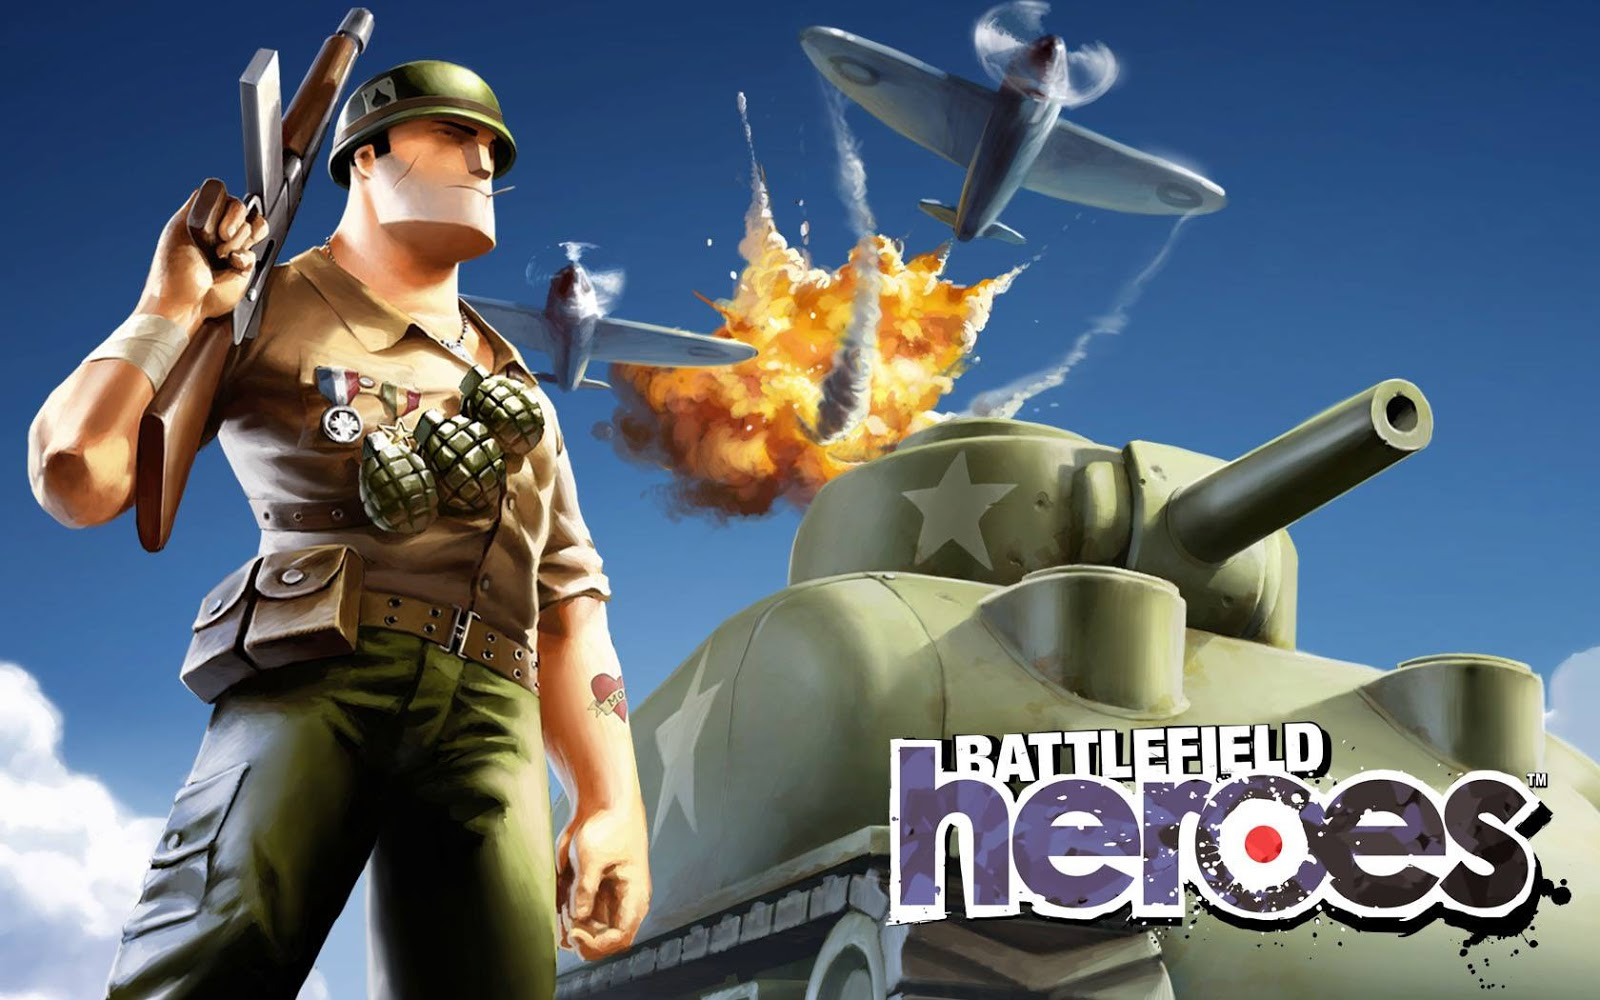 Cell shaded screenshot of a WW2 soldier with a gun, a tank behind them, and two planes dogfighting in the sky above..